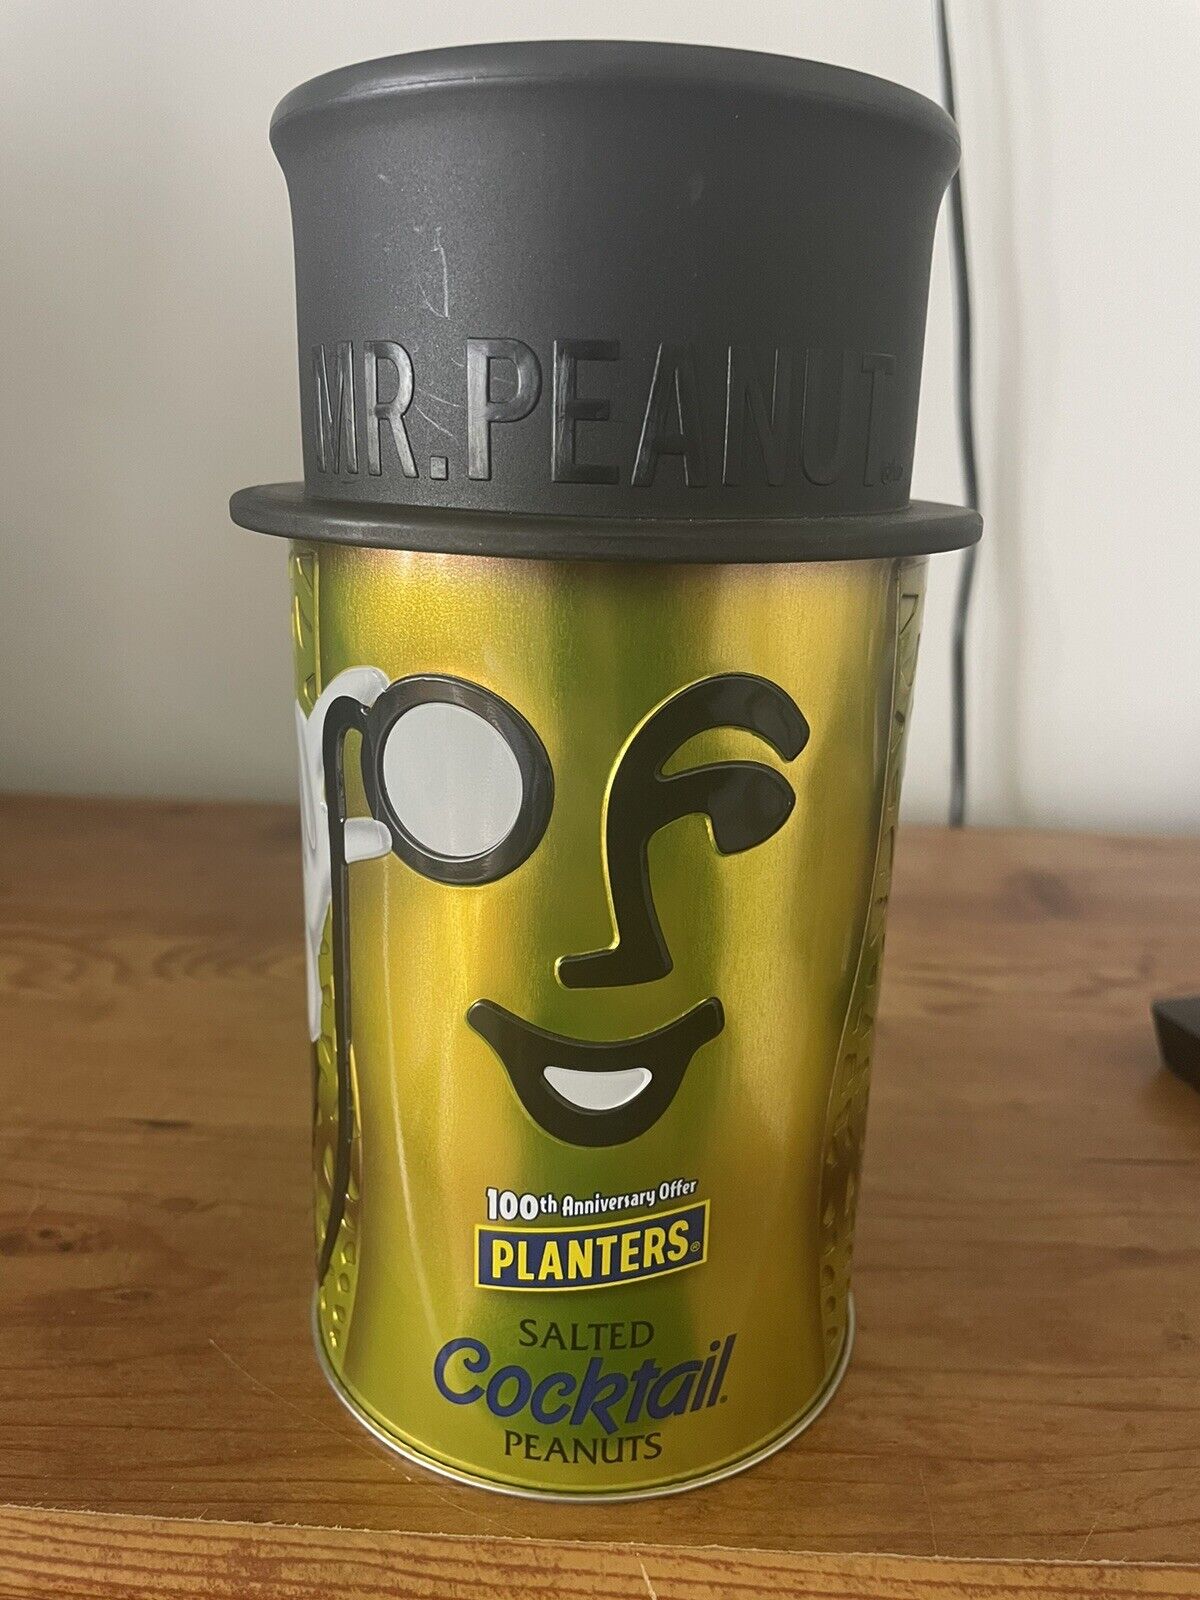 100th Anniversary Offer Planters Salted Cocktail Peanuts Hat And Tin W/peanuts